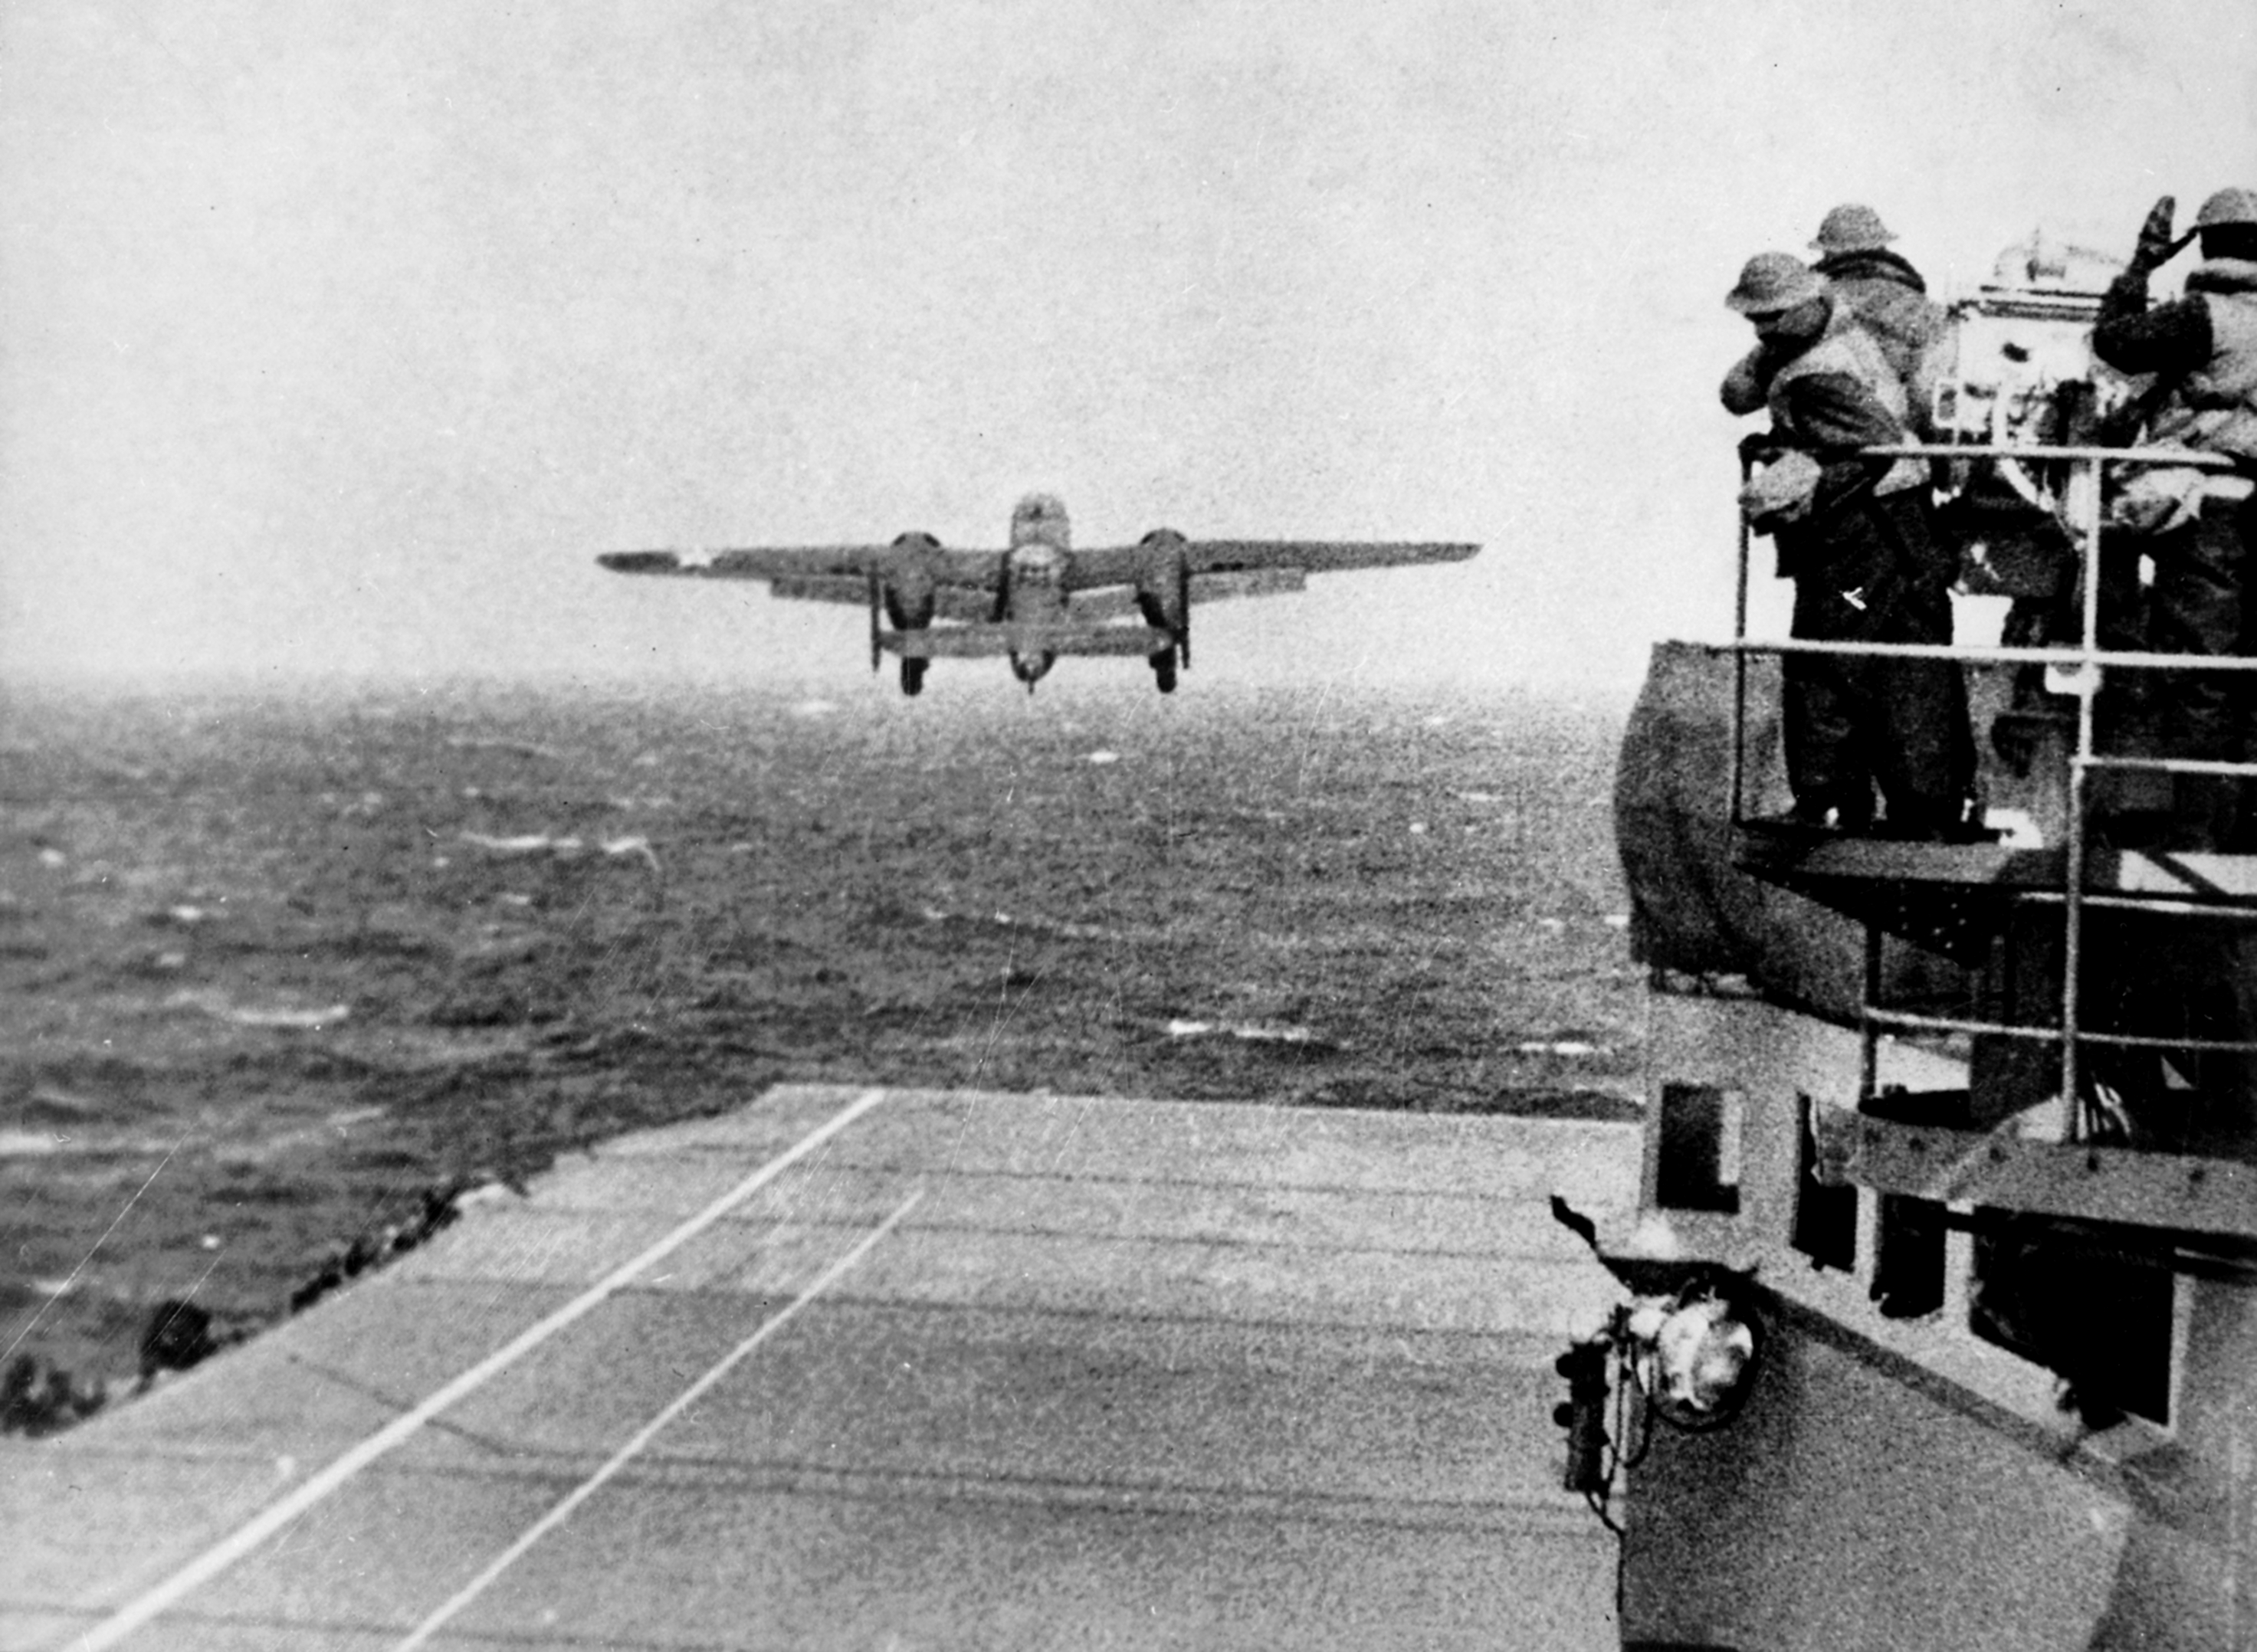 April 18 1942 - The Doolittle Raid is Launched from the USS Hornet